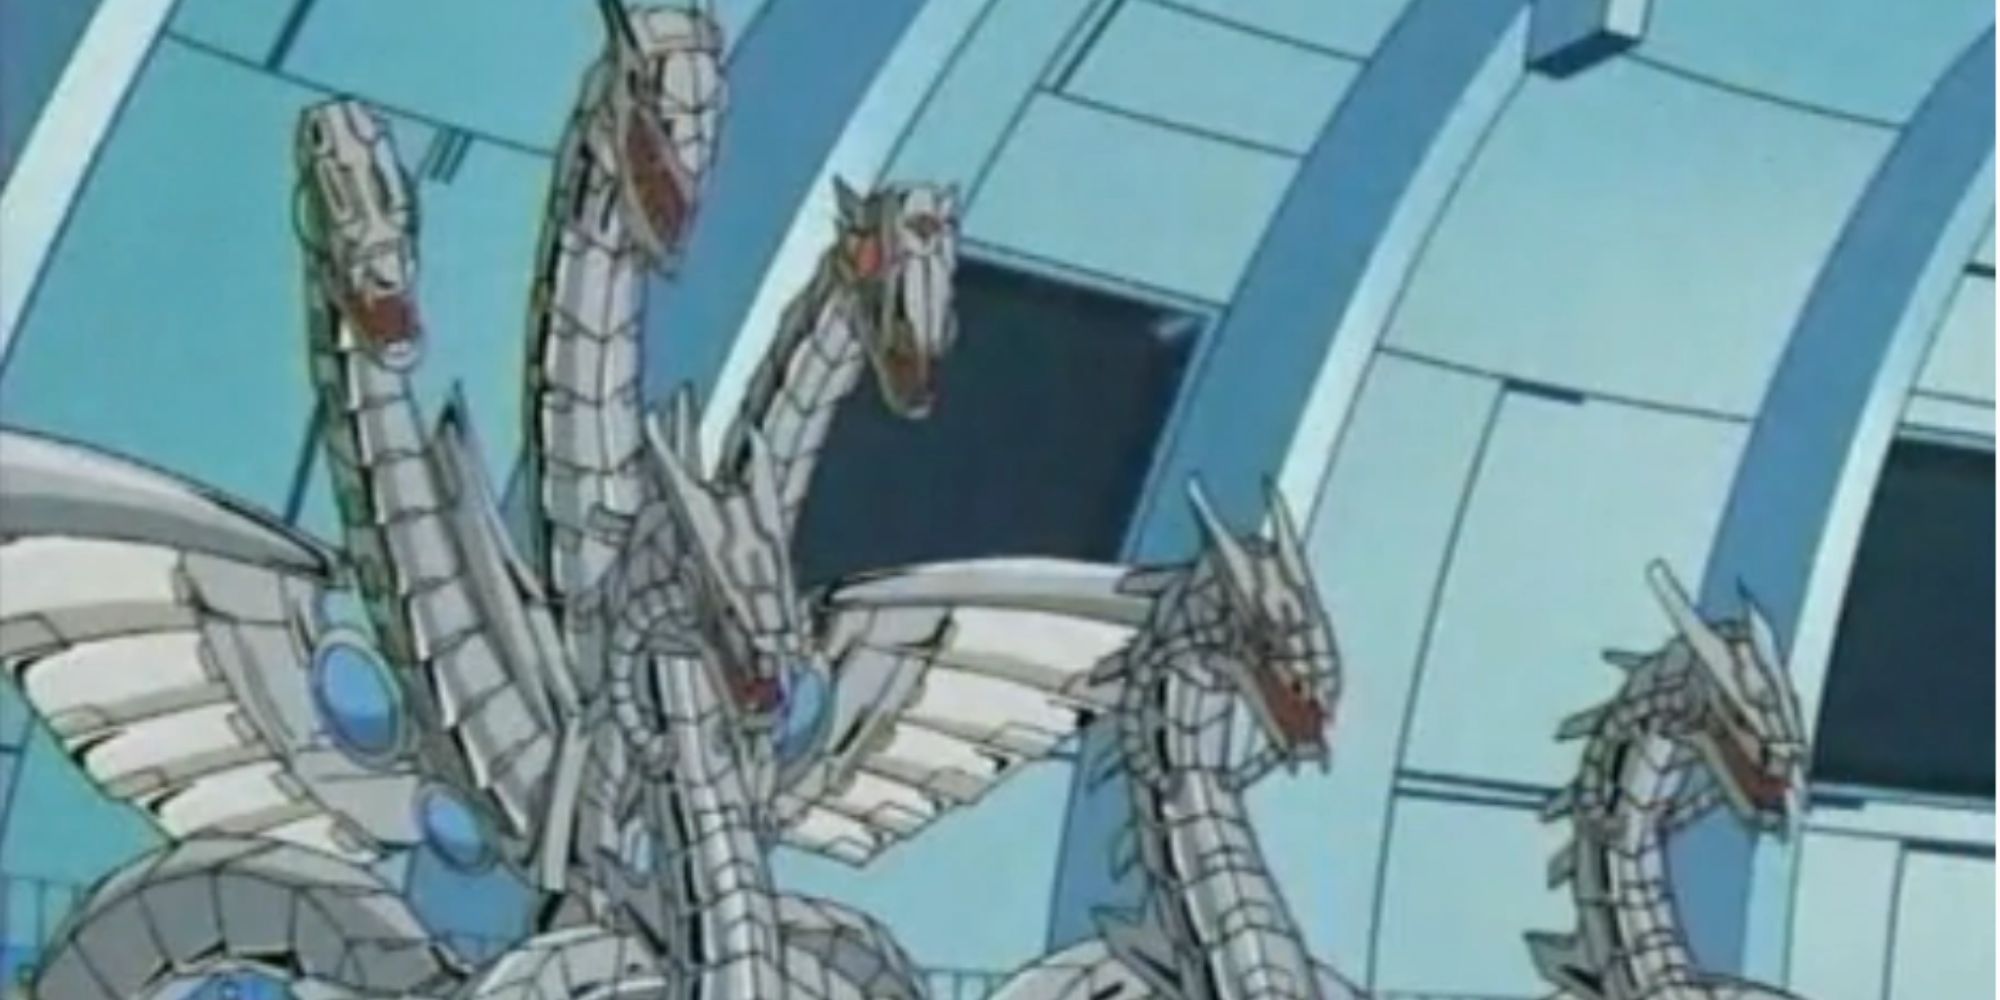 The Cyber Dragon monsters from Yu Gi Oh